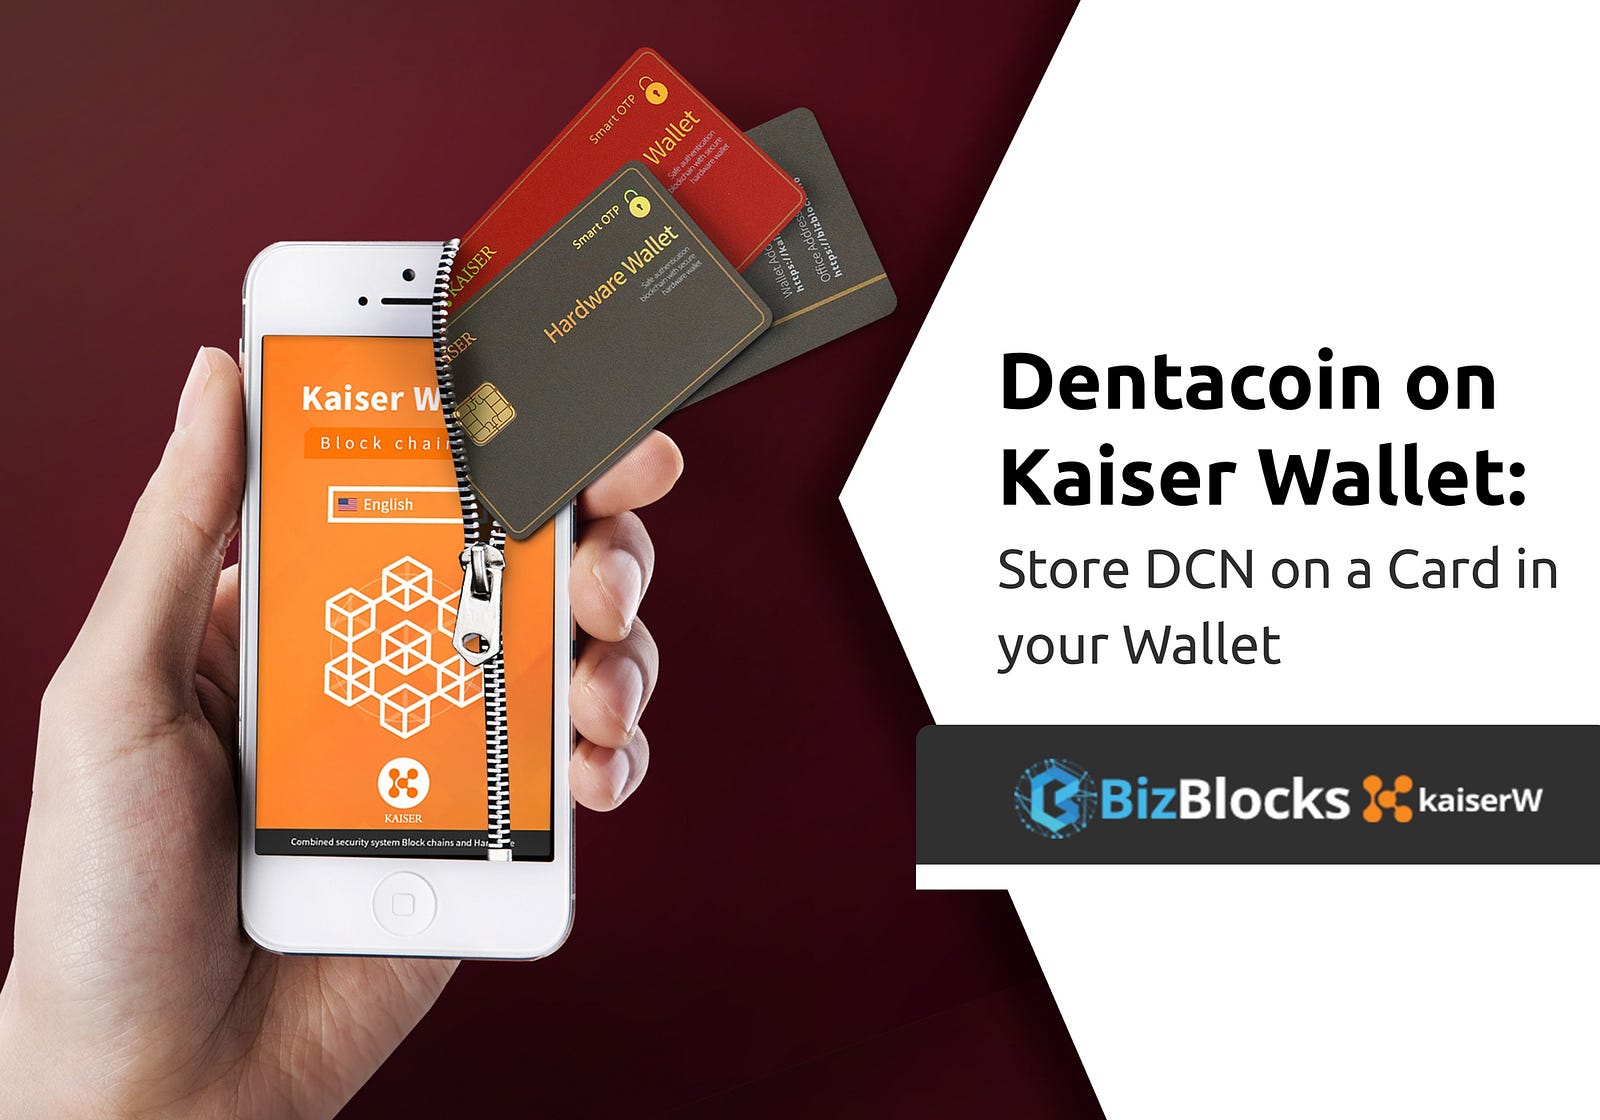 How to buy Dentacoin